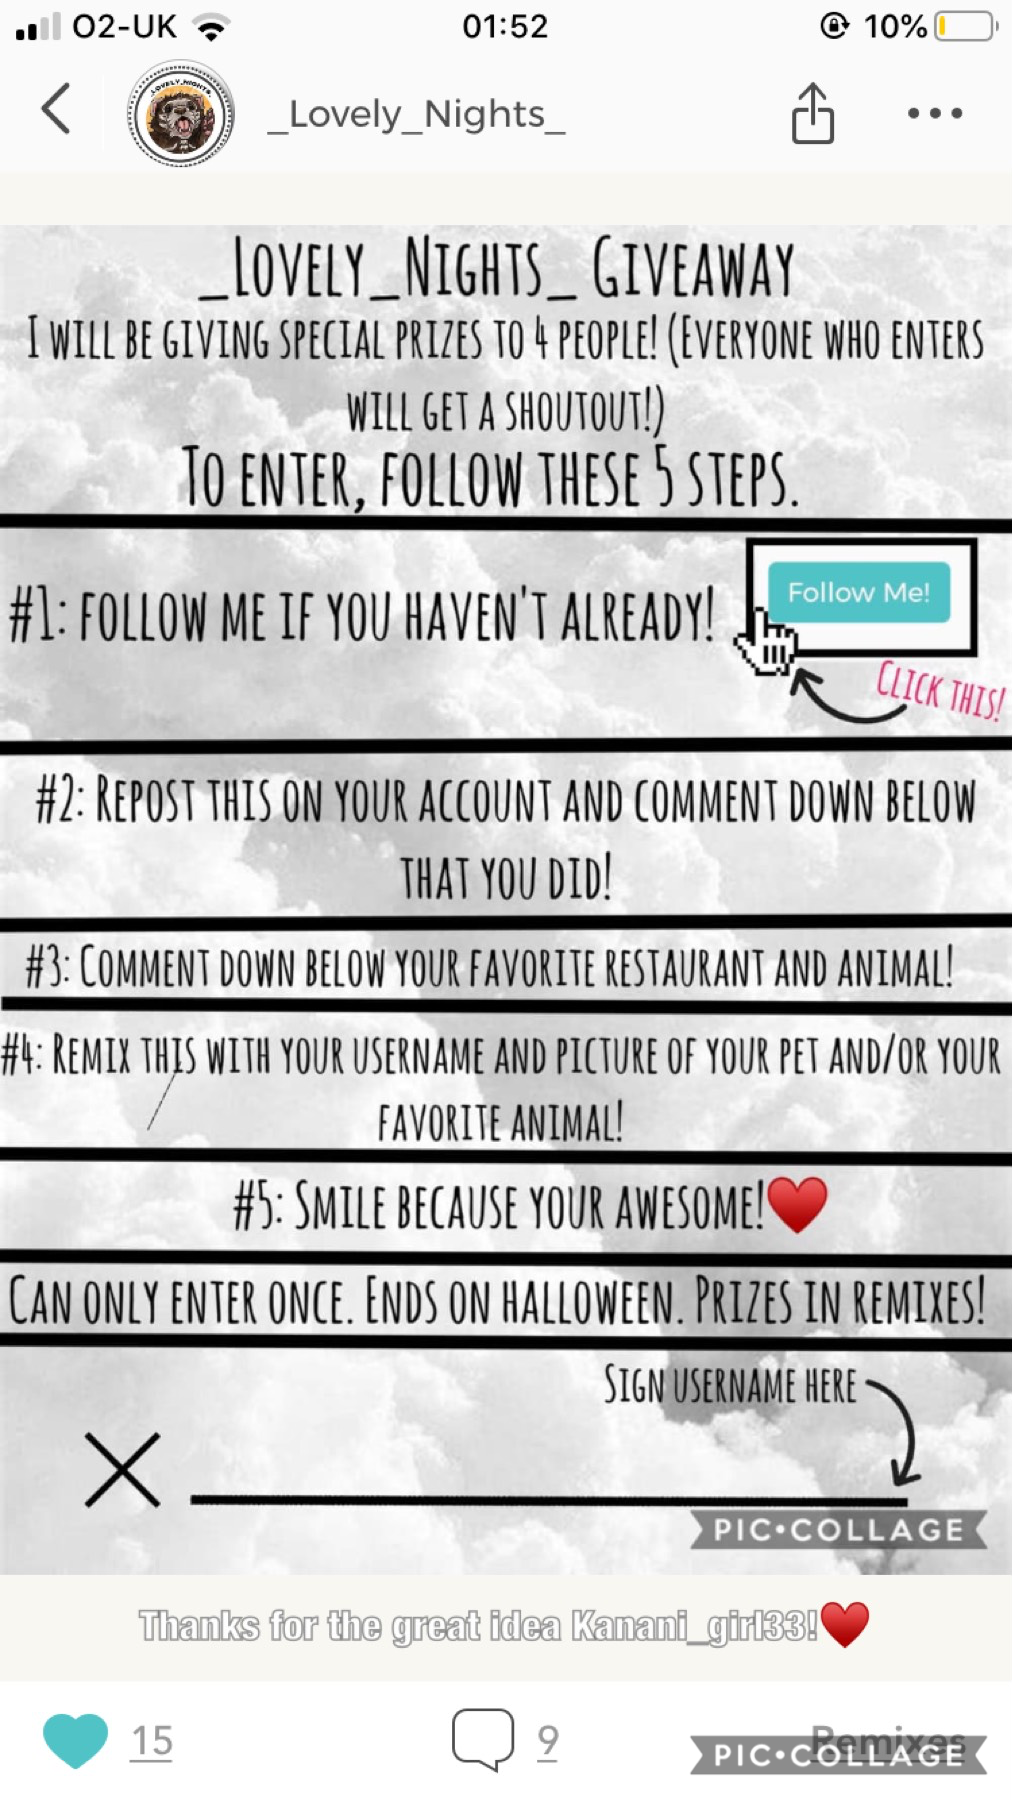 Go join in _Lovely_Nights_ ‘s giveaway!!! Ends on Halloween!!